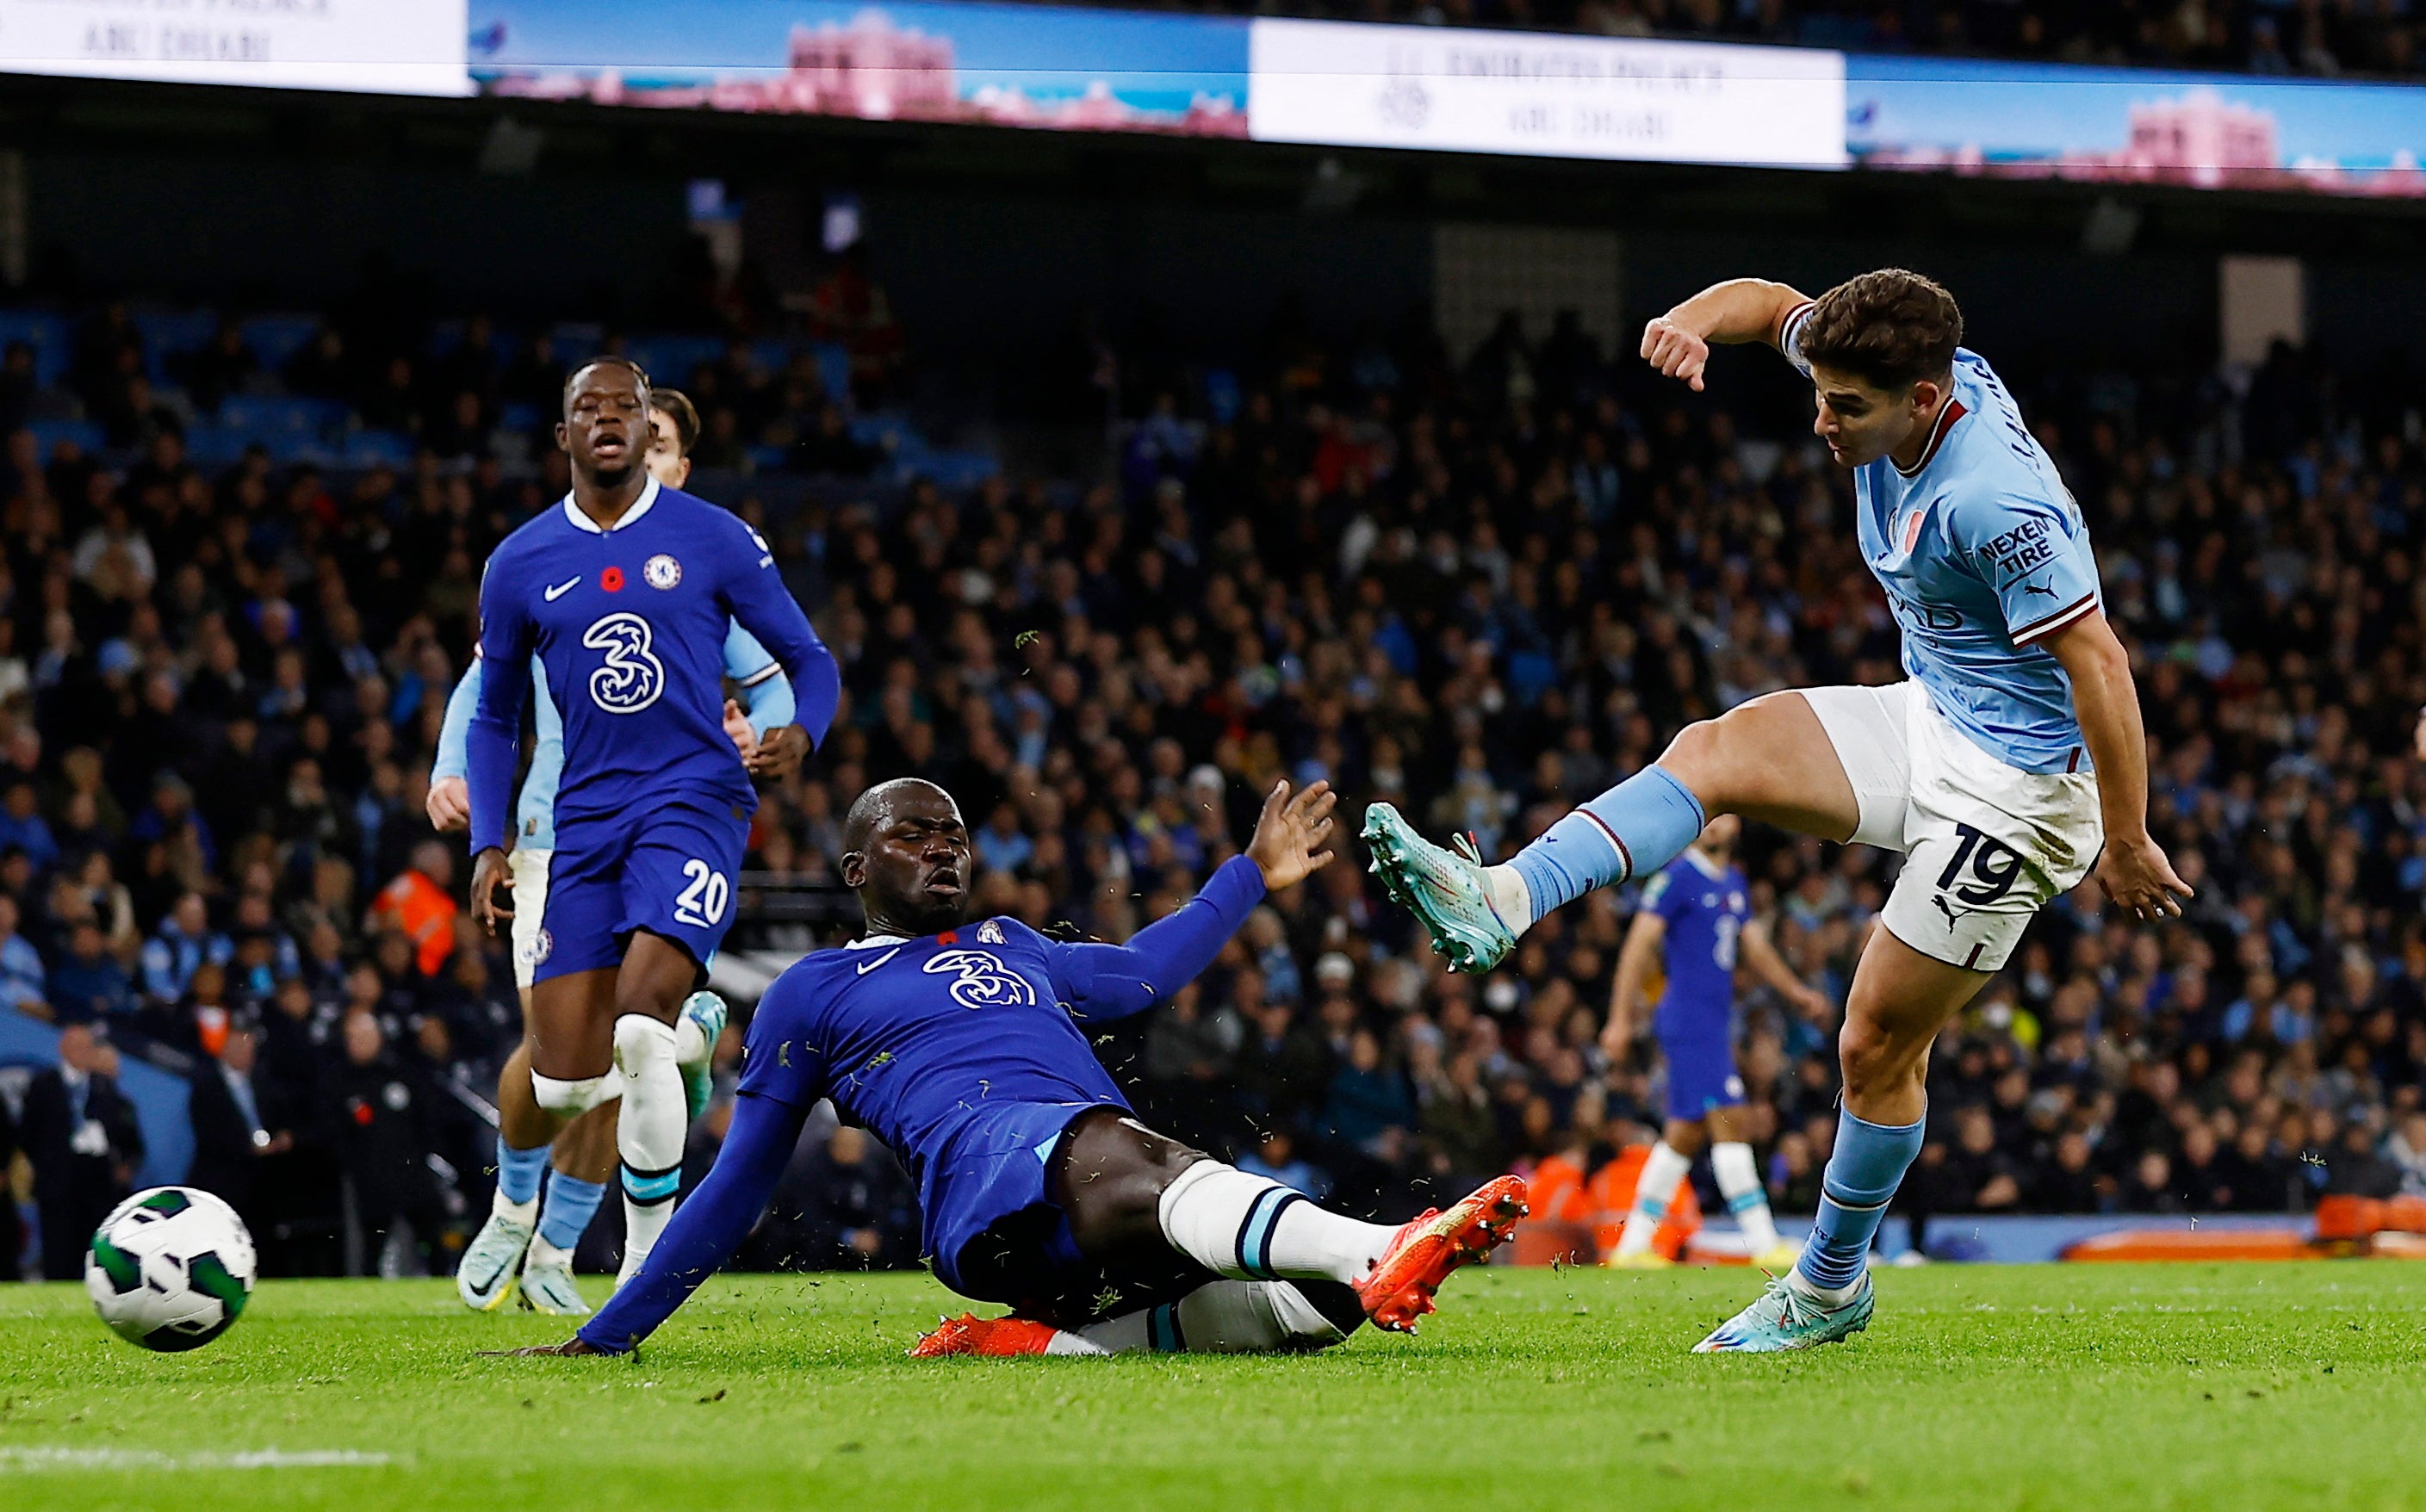 Chelsea and Manchester City meet in the Premier League looking to make up lost ground